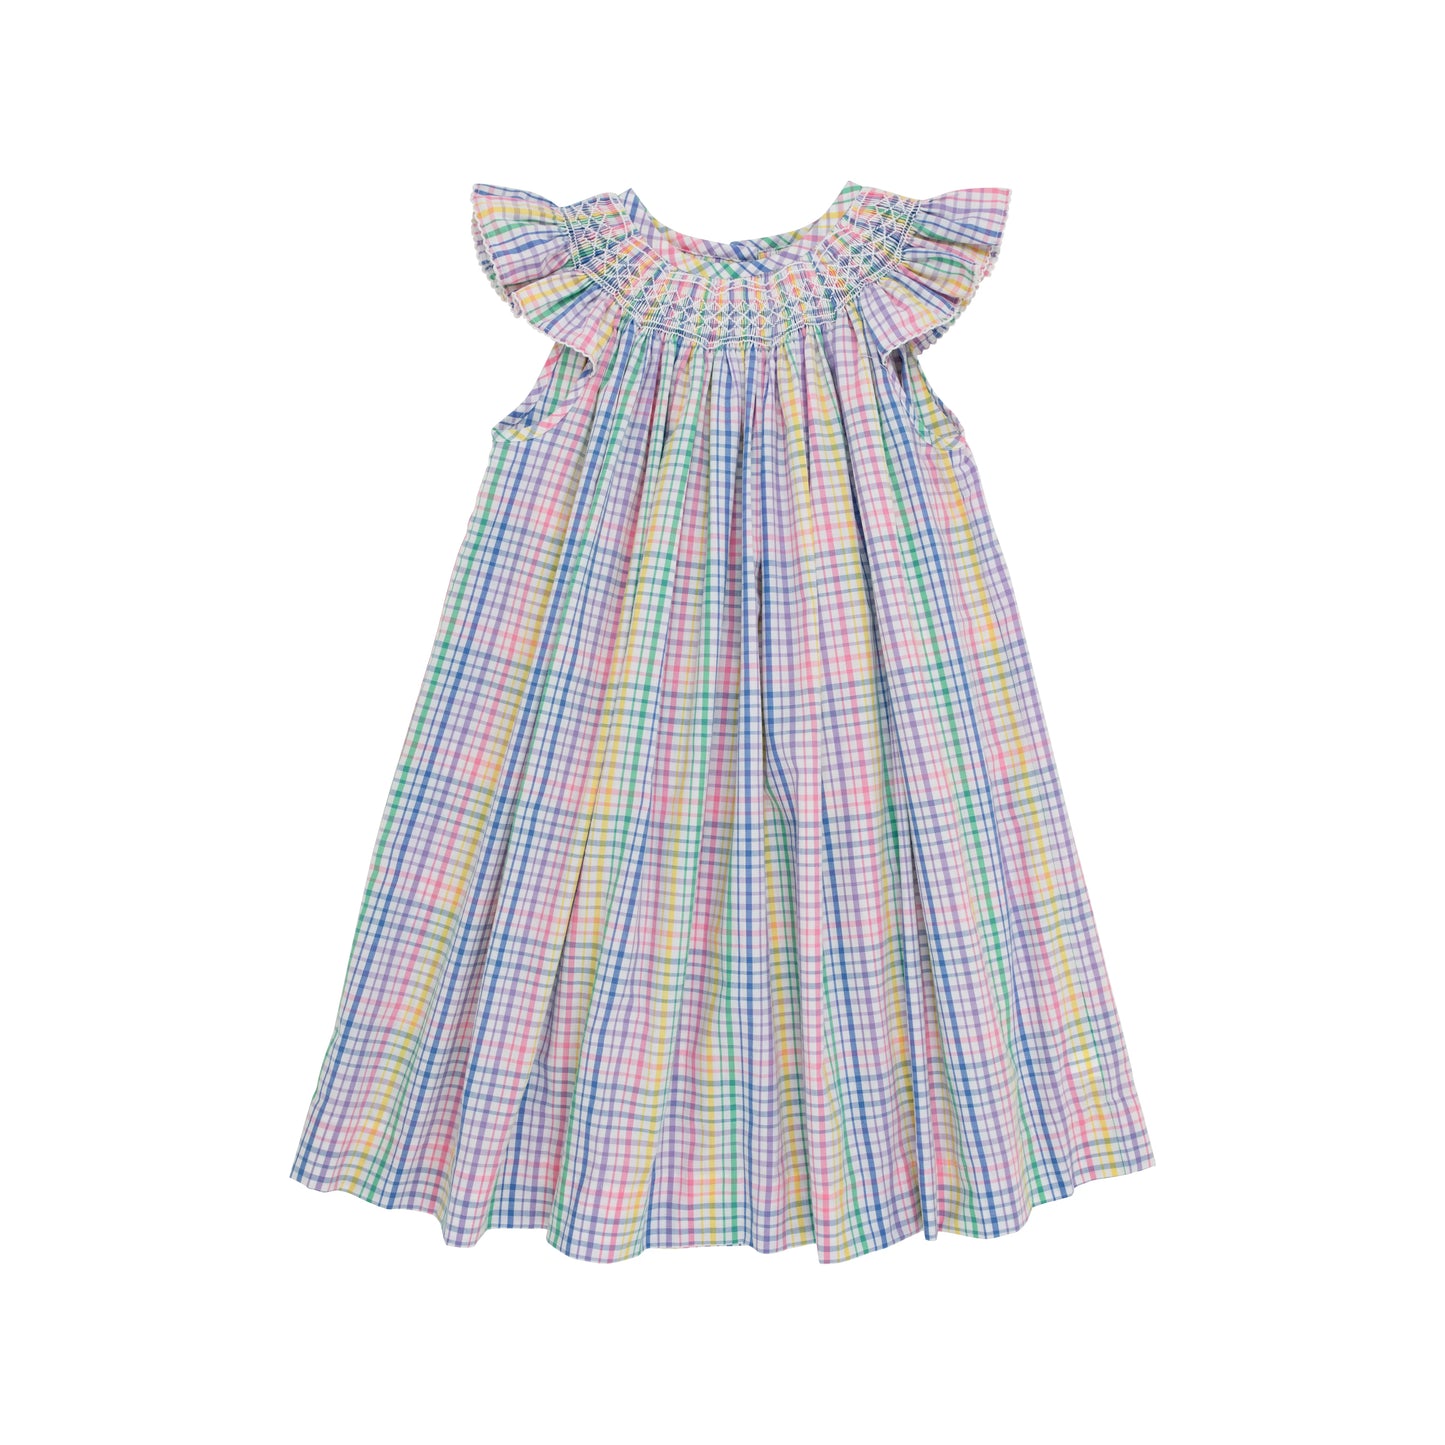 The Beaufort Bonnet - Angel Sleeve Sandy Smocked Dress Colored Pens Plaid With Worth Avenue White